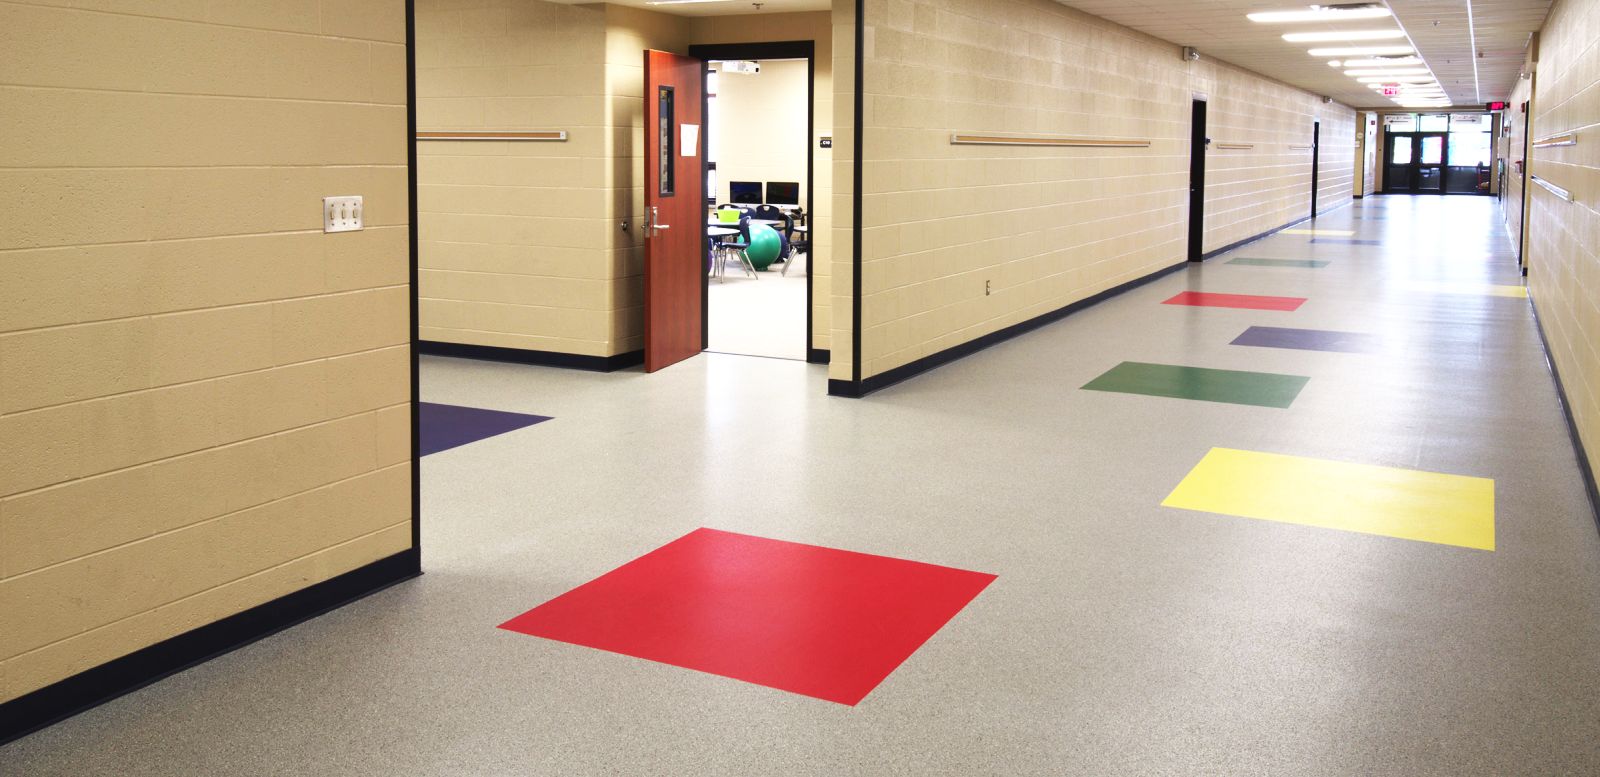 What Flooring Options Do Schools Have?